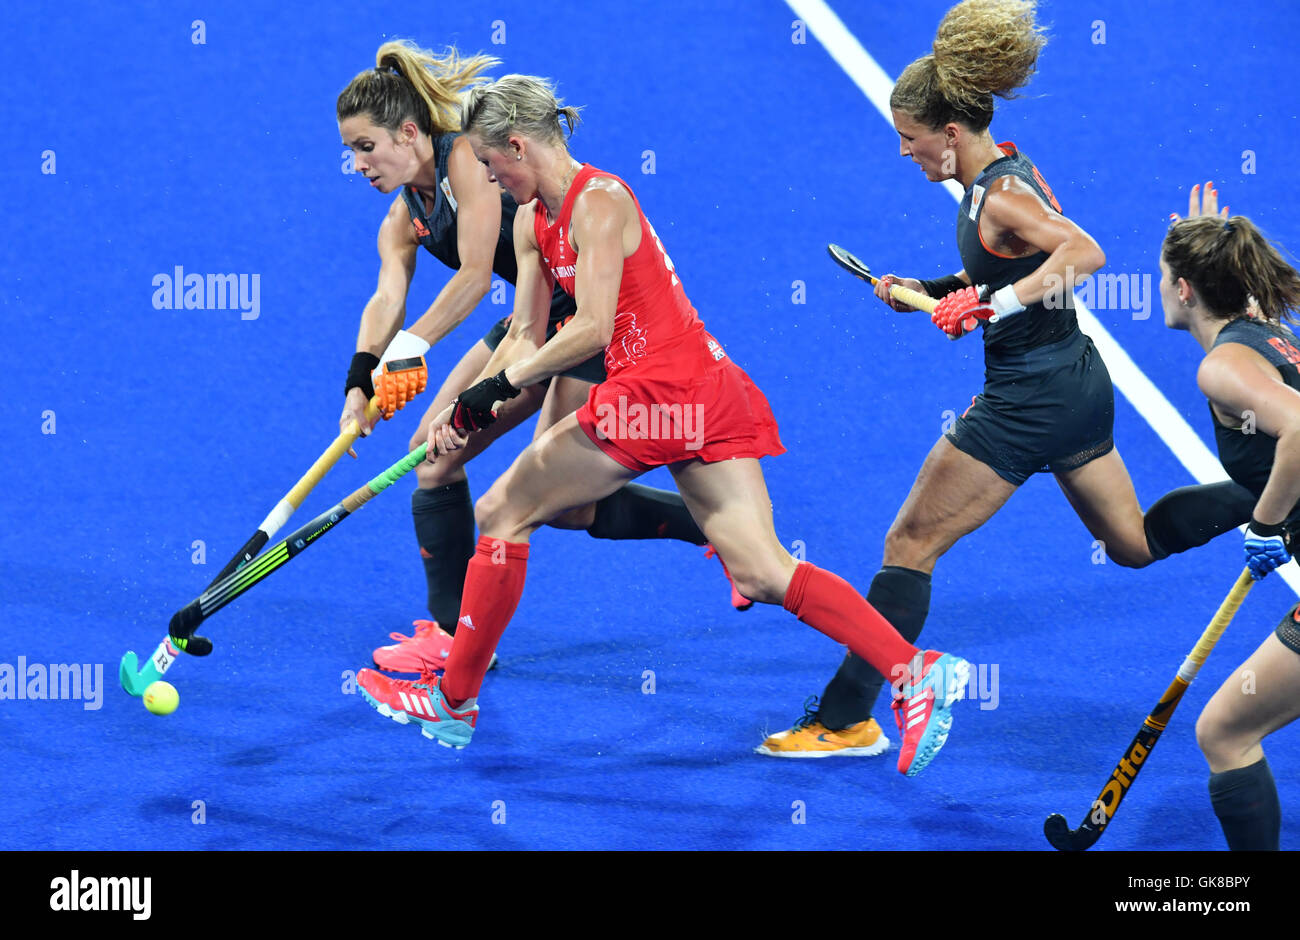 Rio de Janeiro, Brazil. 19th Aug, 2016. (L-R) Ellen Hoog of the Netherlands, Alexandra Danson of Great Britain, Maria Verschoor and Marloes Keetels of the Netherlands in action during the Women's Field Hockey Gold Medal Match between the Netherlands and Great Britain at the Olympic Hockey Centre during the Rio 2016 Olympic Games in Rio de Janeiro, Brazil, 19 August 2016. Photo: Felix Kaestle/dpa/Alamy Live News Stock Photo